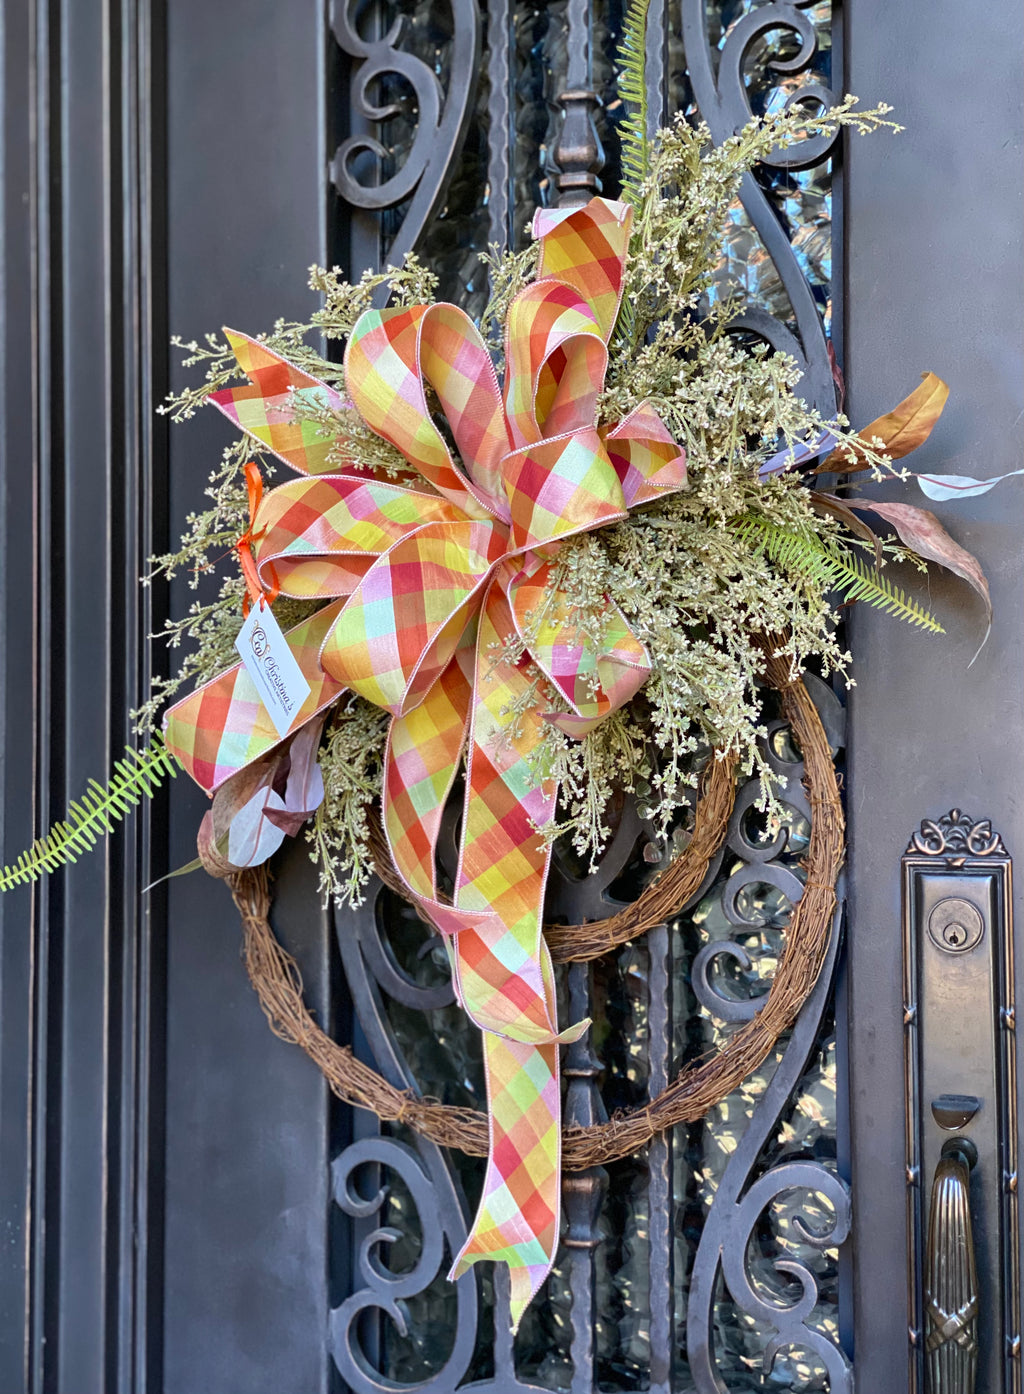 Berry Fall Wreath product image features a fall wreath.  Berry stems, seeded eucalyptus stems, fall fern picks, double ring grapevine and a large, multi-colored bow.  Colors are brown, cream , shades of orange, yellow and green.  Measures 40"H X 23"W. Comes ready to hang on a nail, hook or door hanger.Faux.  Indoor outdoor use.